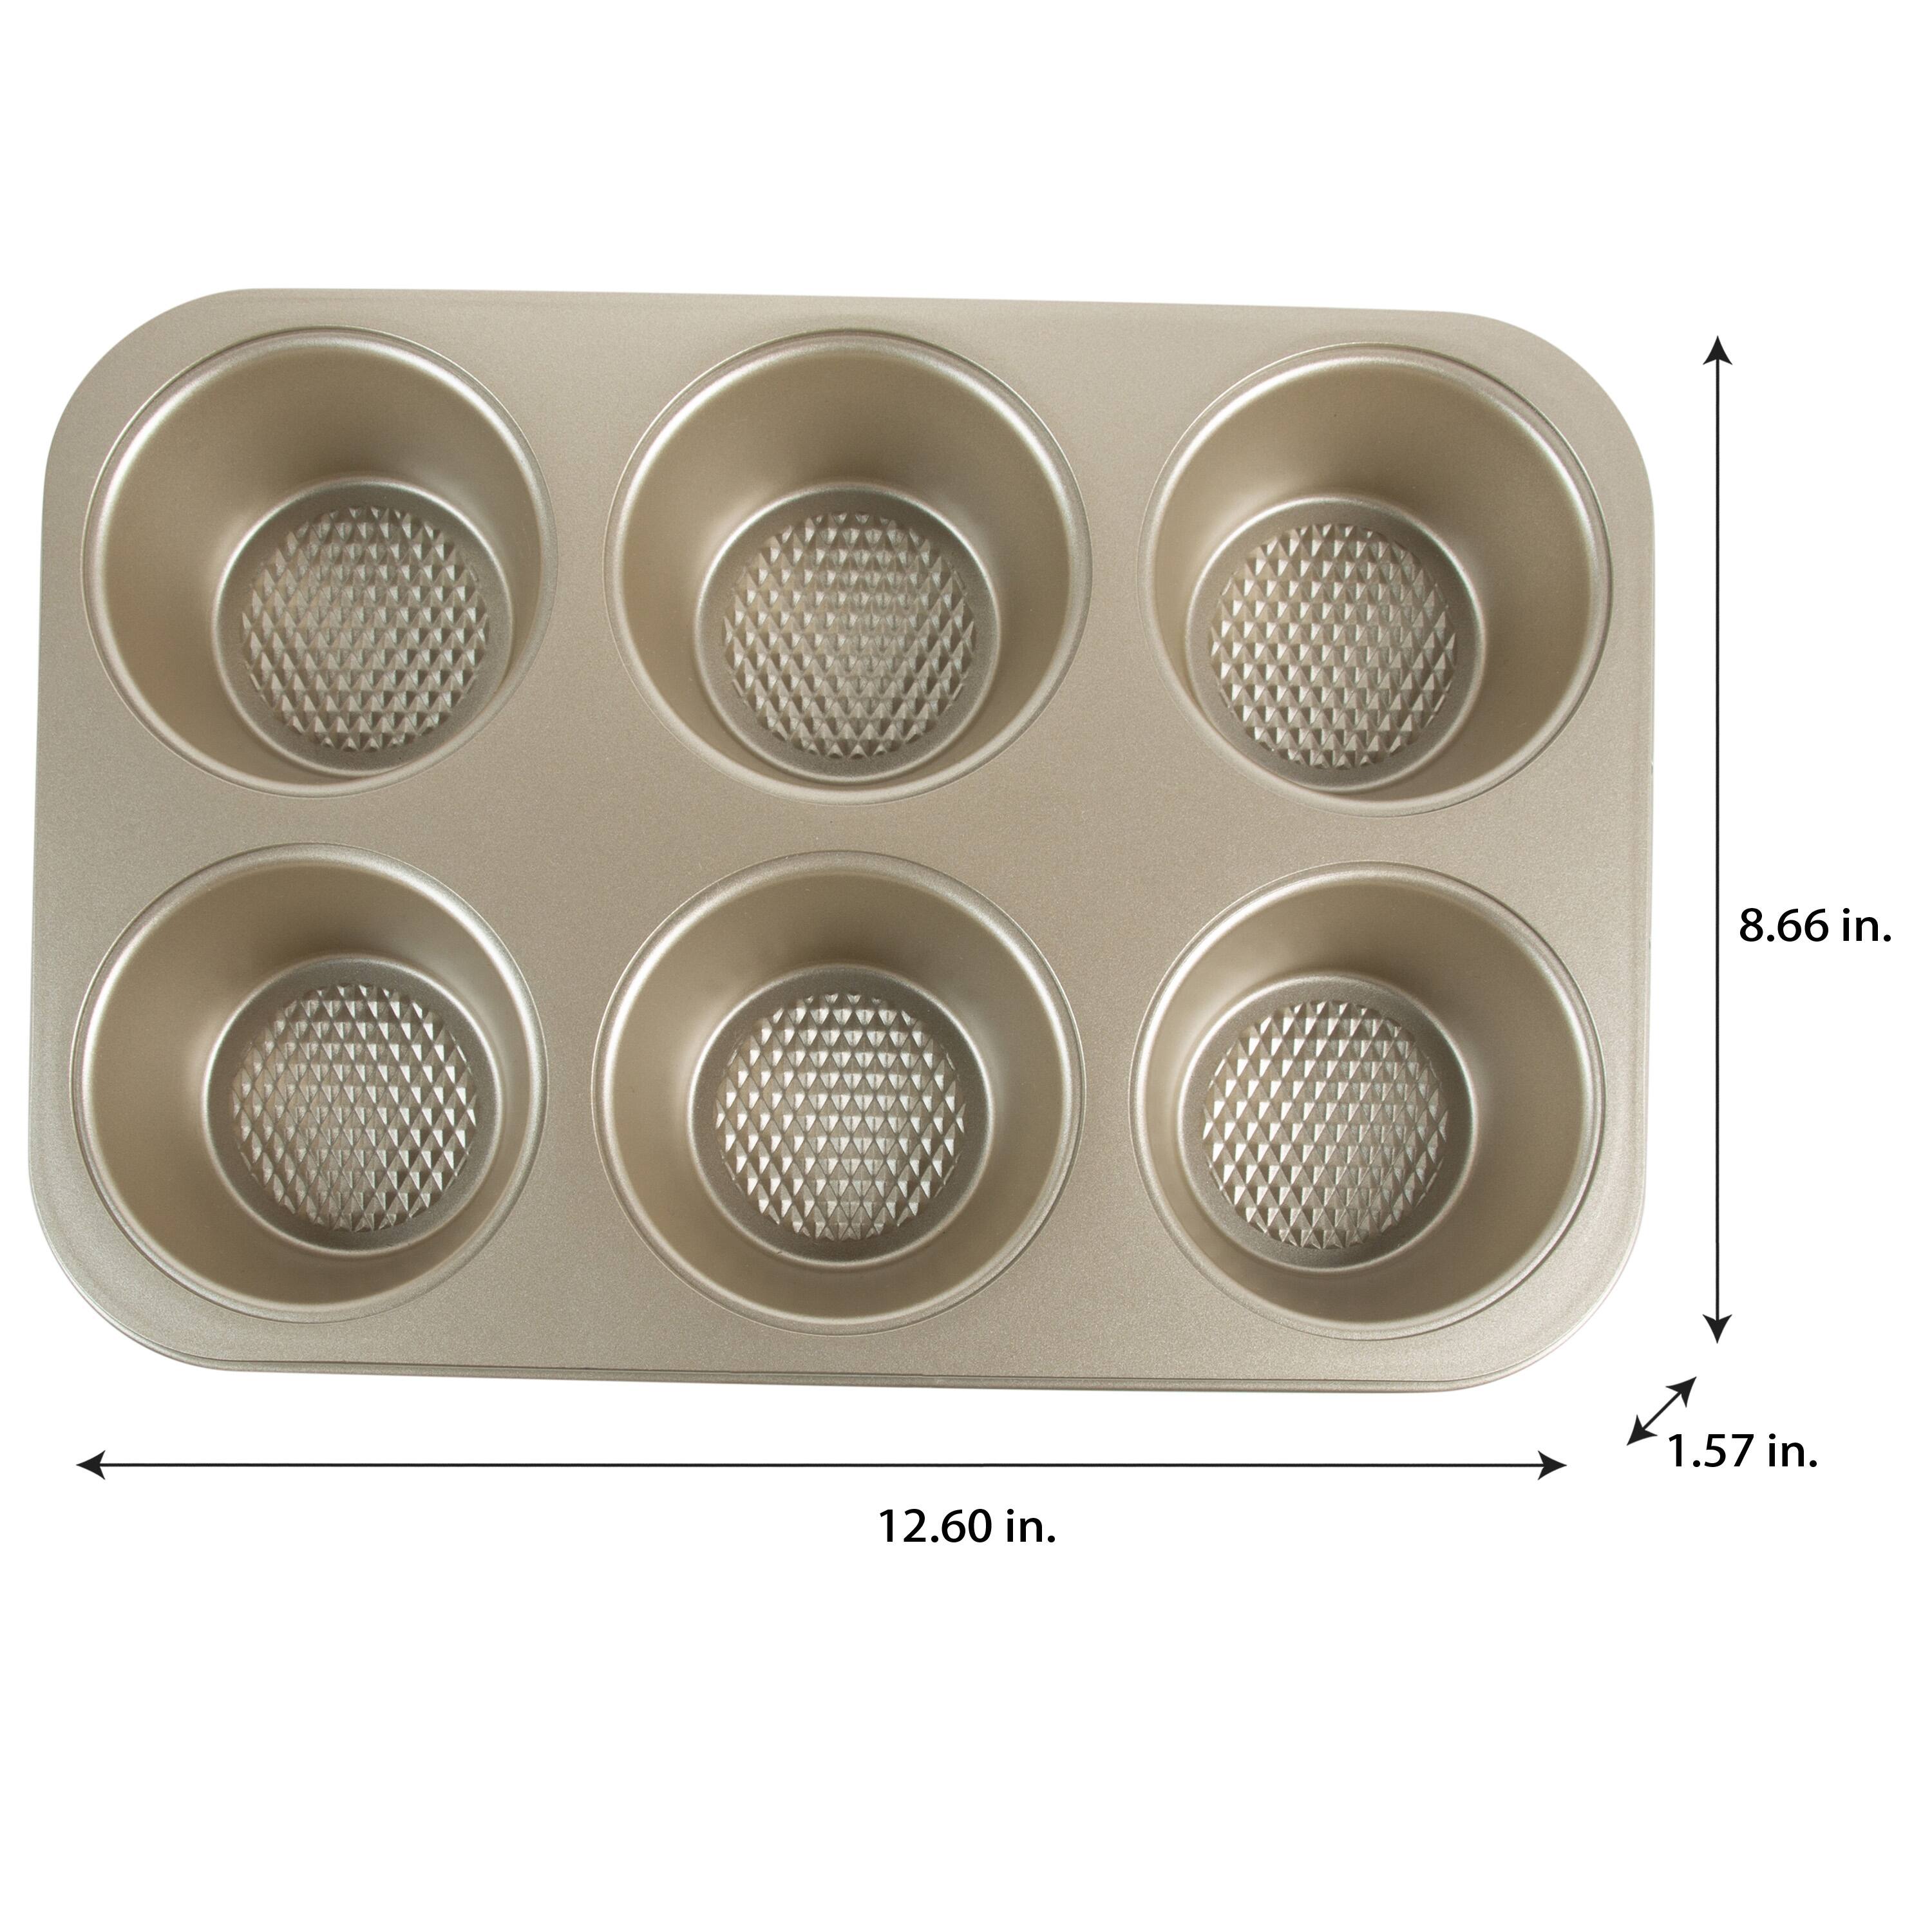 Down to Earth Muffin Pan, 6 Cup - Azure Standard